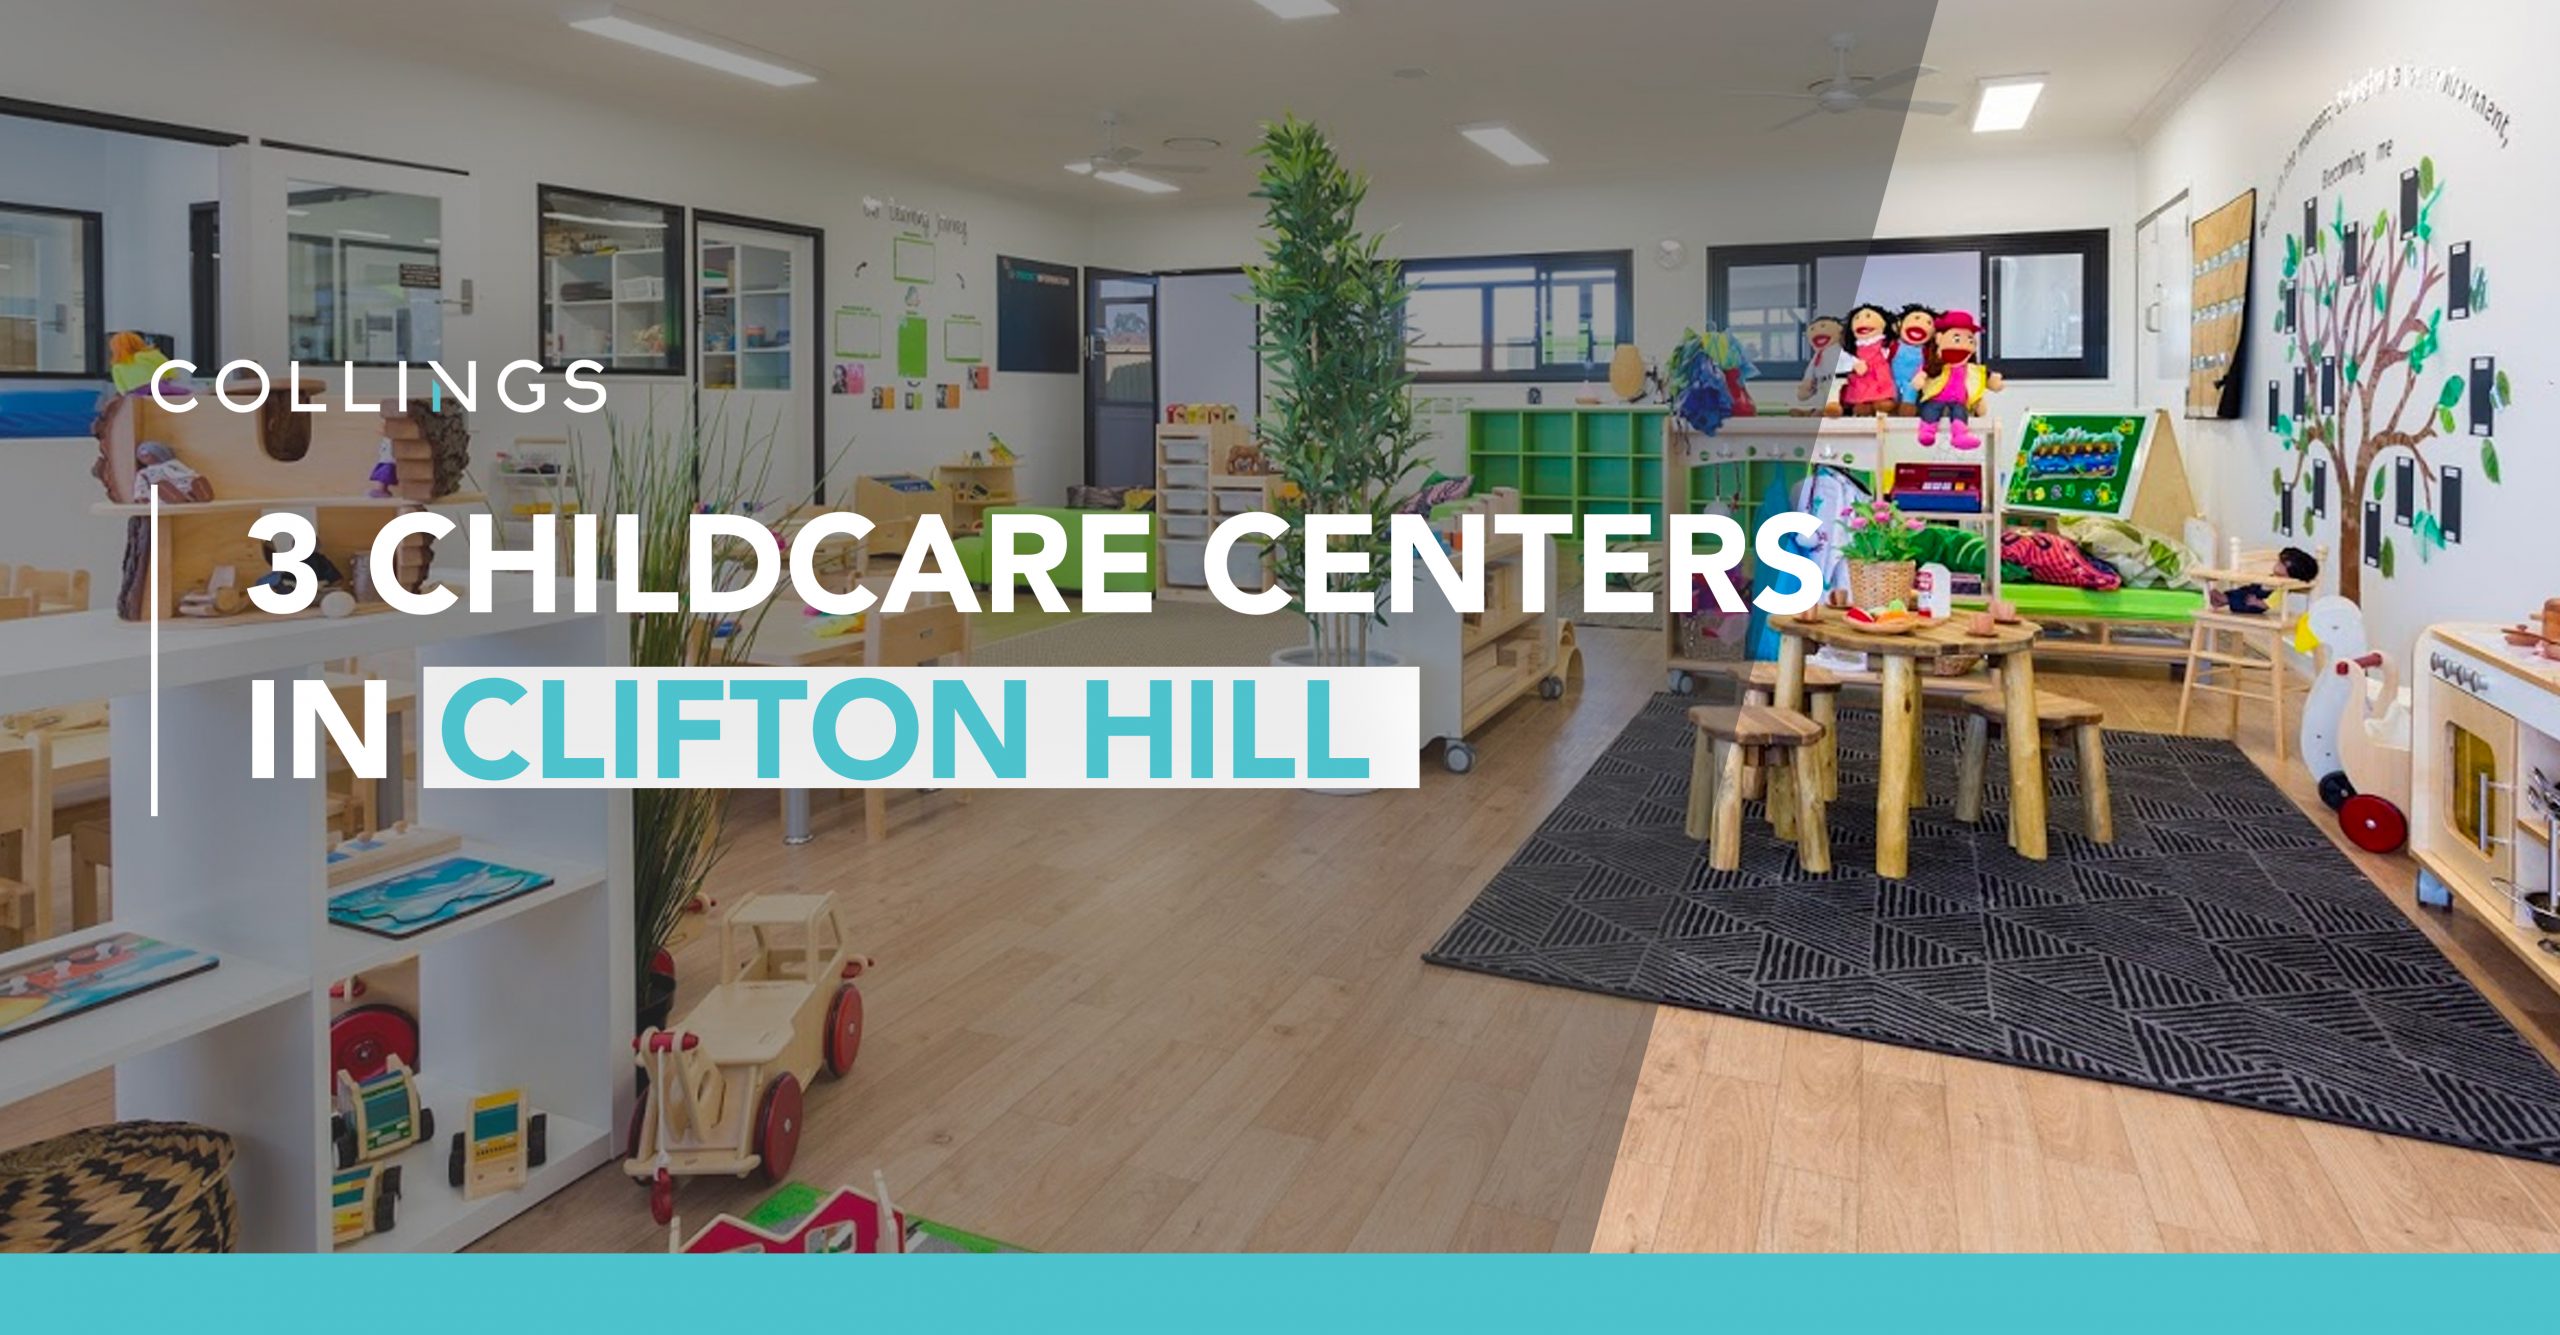 Childcare centers in Clifton Hill